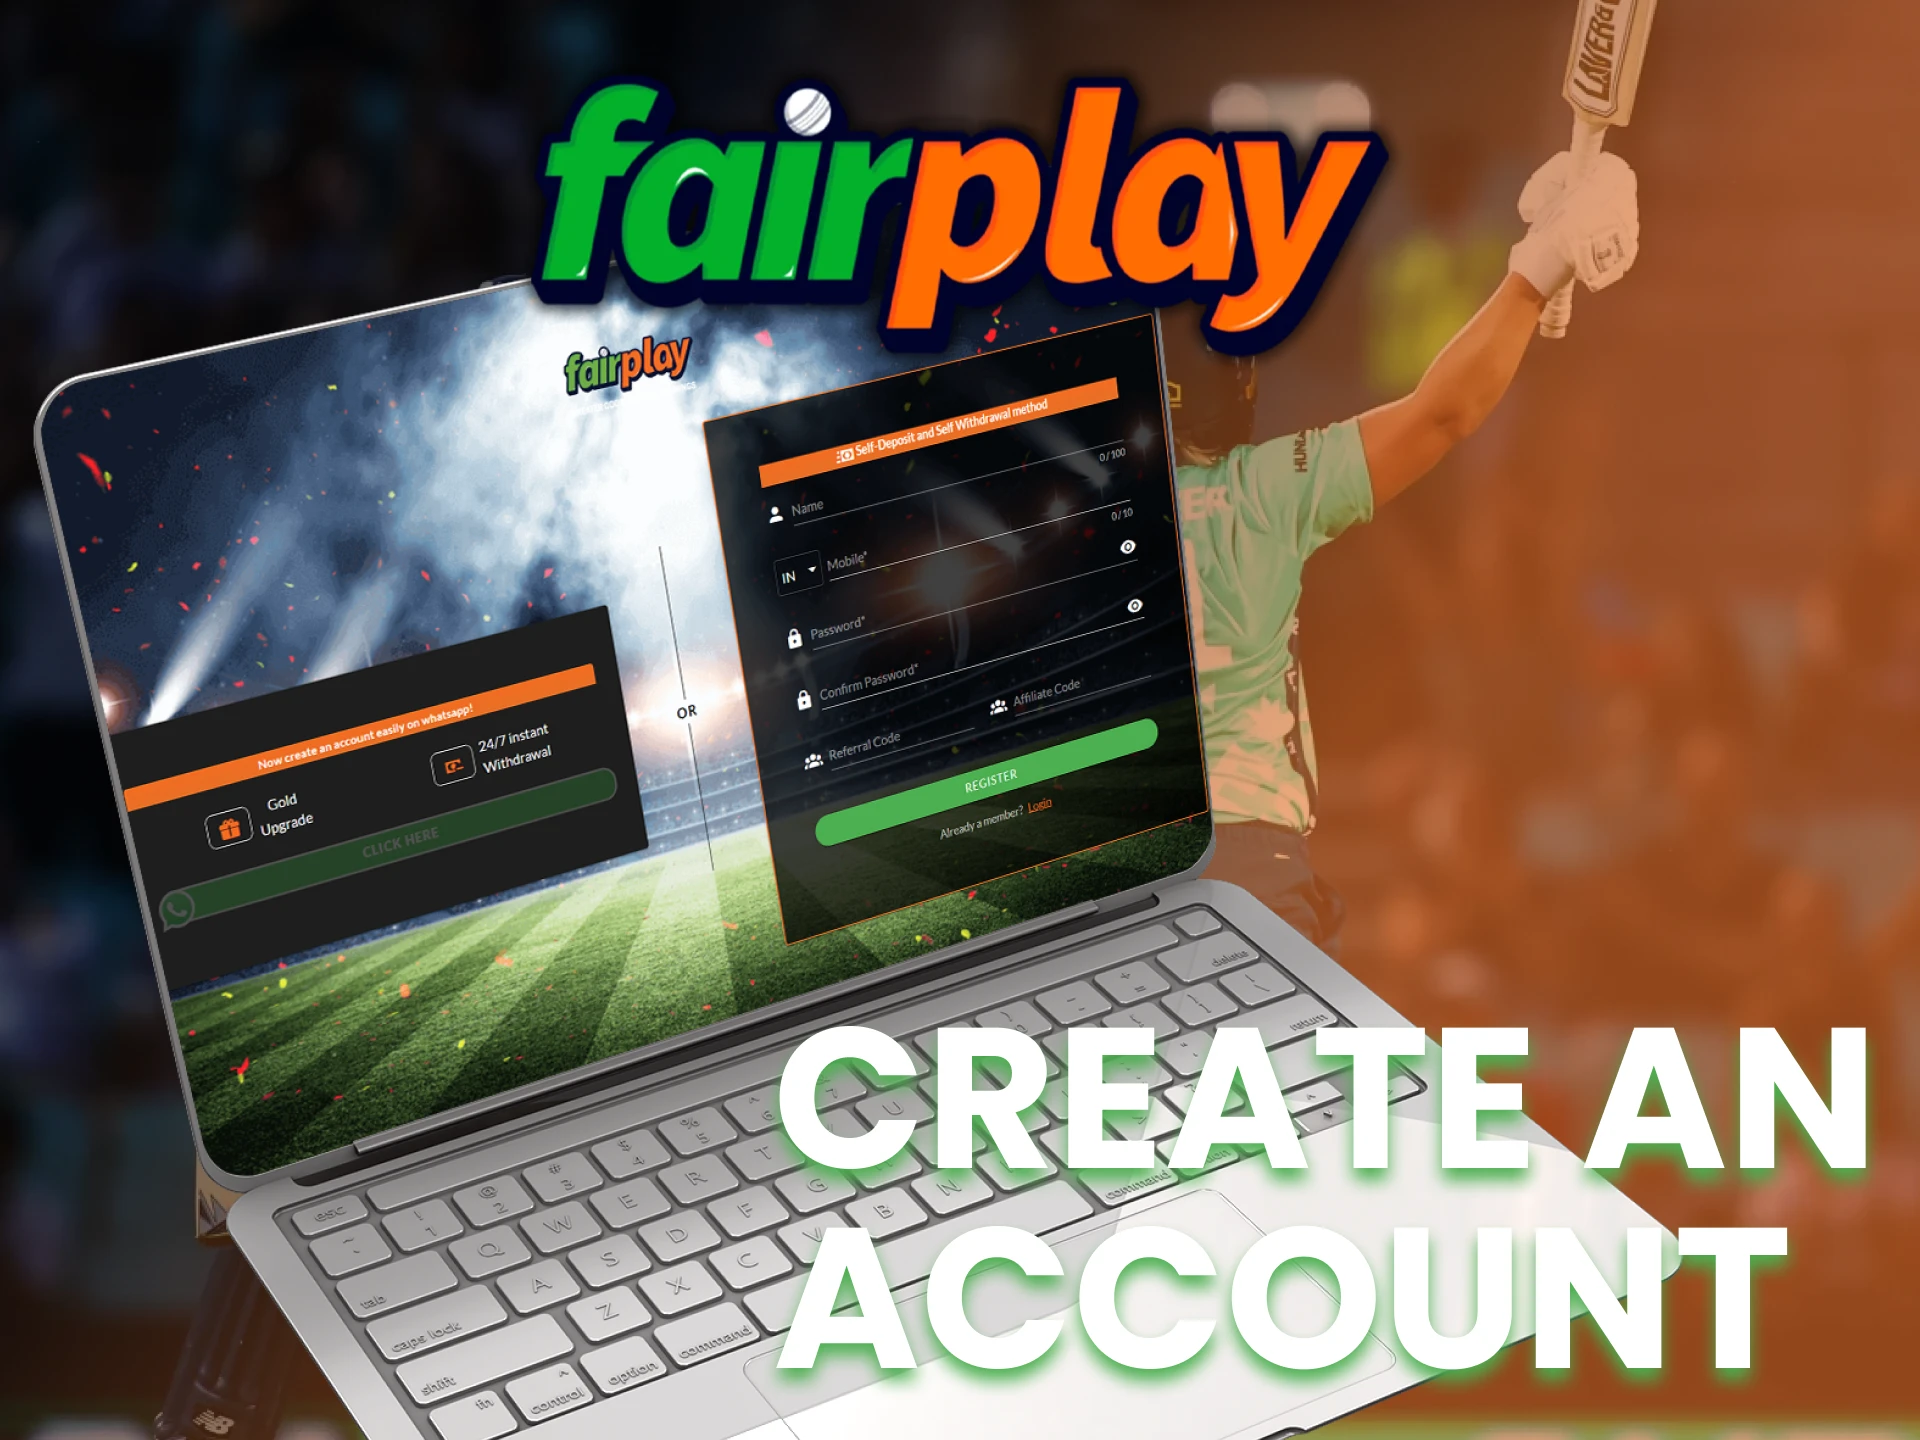 Creatre your own Fairplay account.